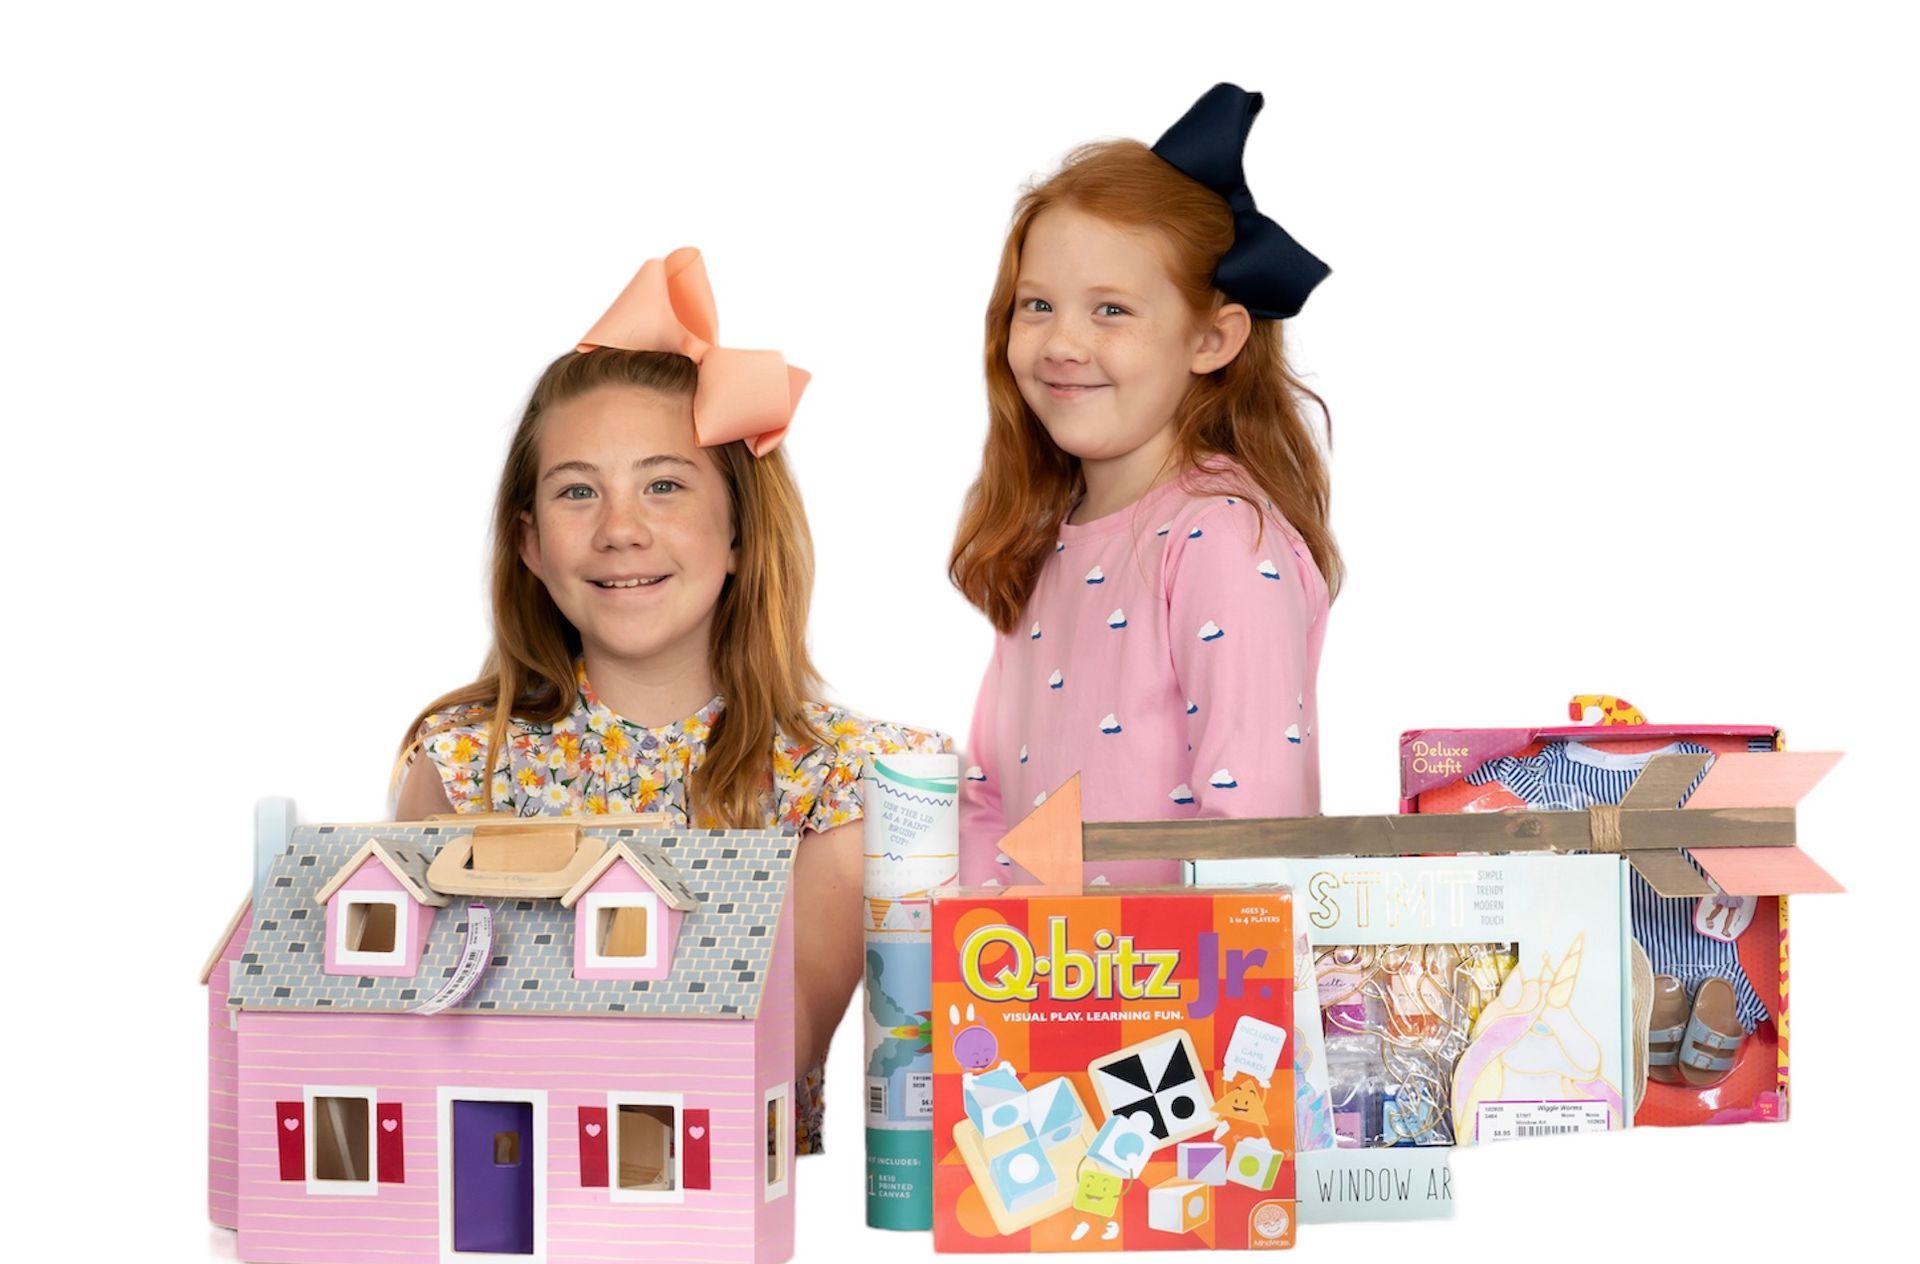 image of two girls with bows in their hair playing with some toys